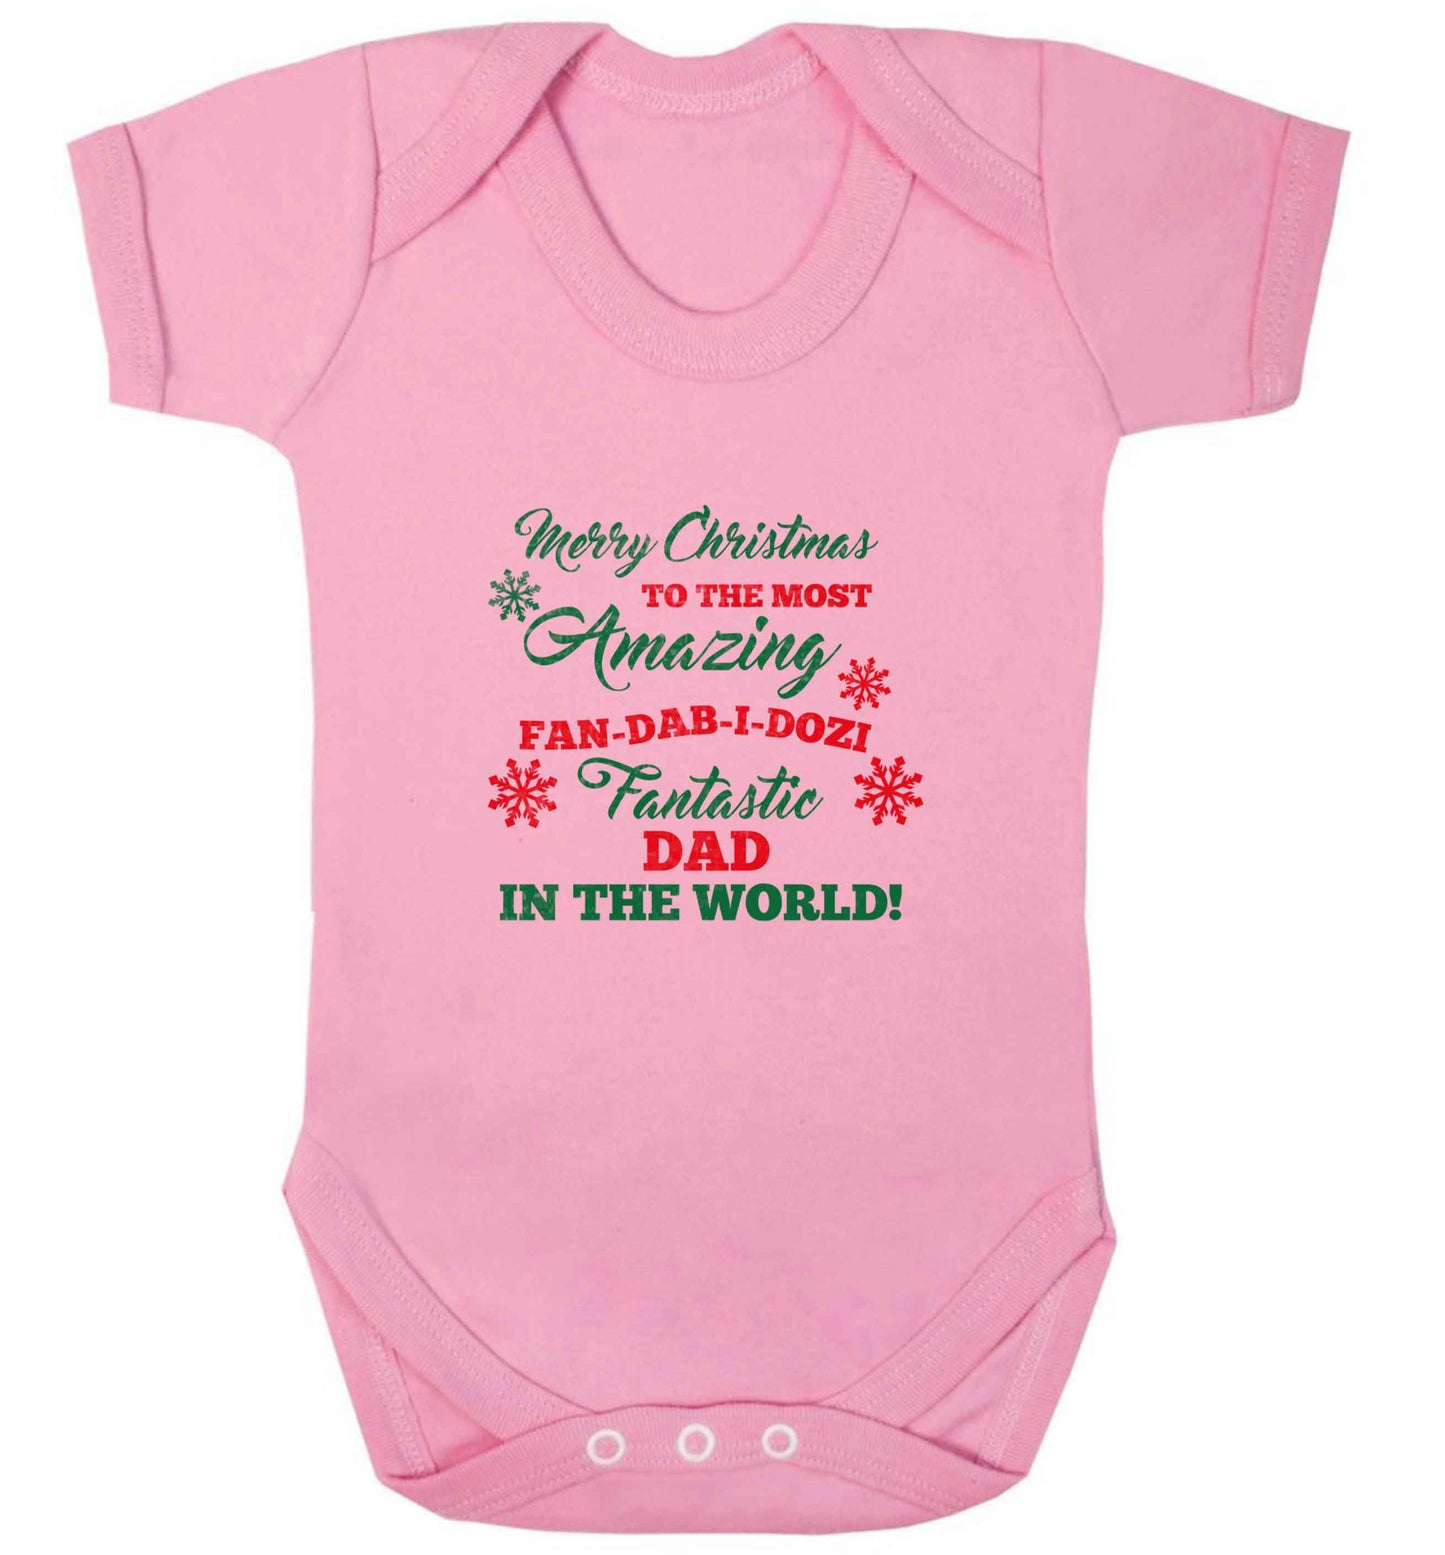 Merry Christmas to the most amazing fan-dab-i-dozi fantasic Dad in the world baby vest pale pink 18-24 months